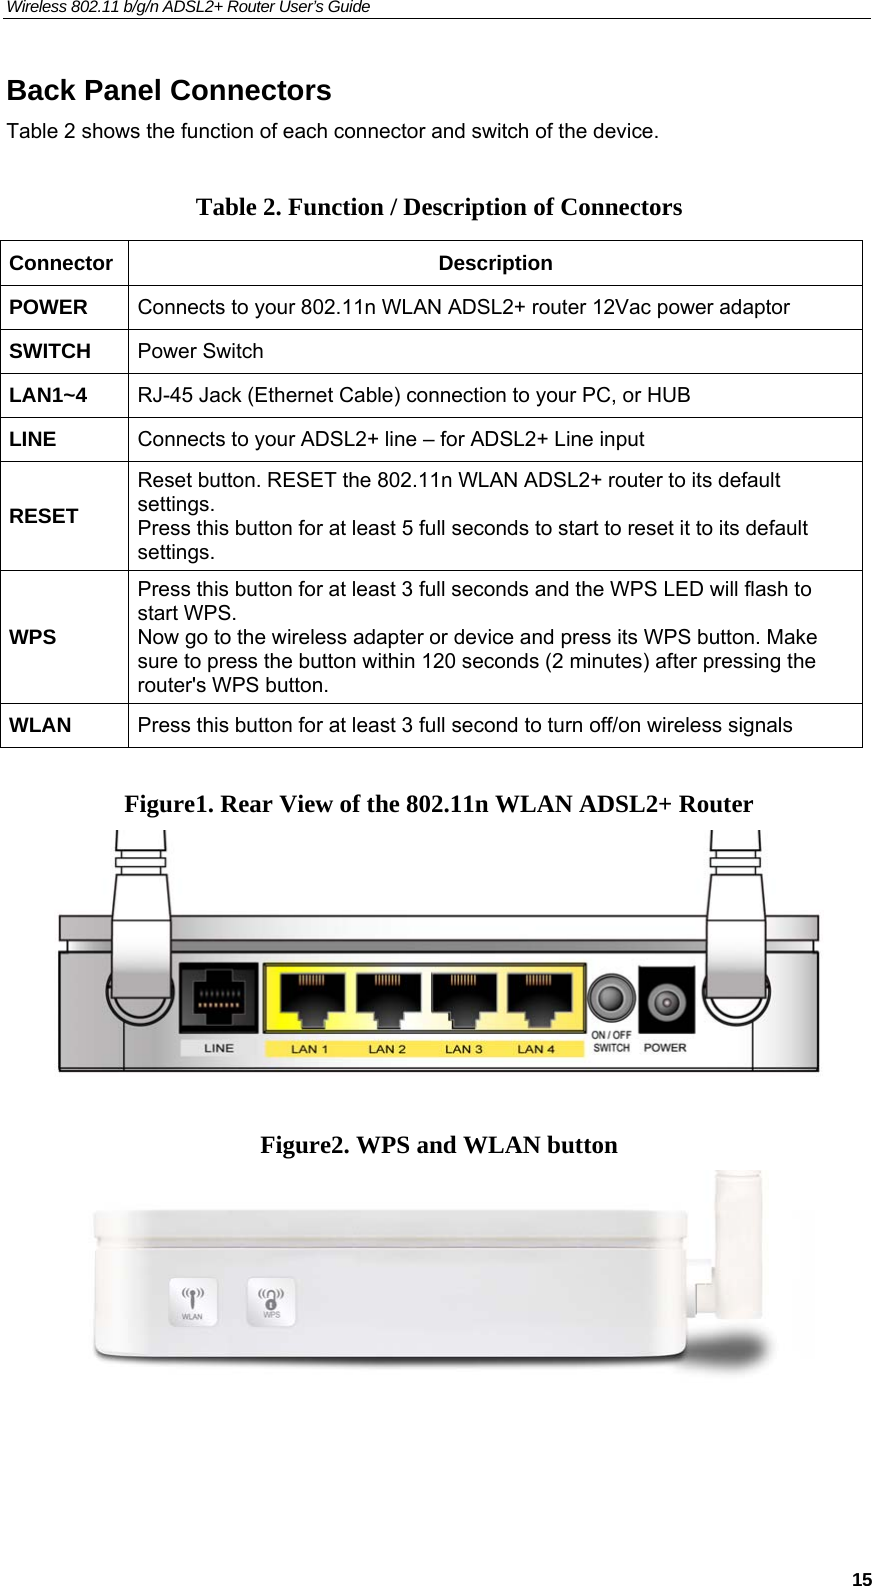 Wireless 802.11 b/g/n ADSL2+ Router User’s Guide    Back Panel Connectors Table 2 shows the function of each connector and switch of the device.  Table 2. Function / Description of Connectors Connector Description POWER  Connects to your 802.11n WLAN ADSL2+ router 12Vac power adaptor SWITCH  Power Switch LAN1~4  RJ-45 Jack (Ethernet Cable) connection to your PC, or HUB LINE  Connects to your ADSL2+ line – for ADSL2+ Line input RESET Reset button. RESET the 802.11n WLAN ADSL2+ router to its default settings. Press this button for at least 5 full seconds to start to reset it to its default settings. WPS Press this button for at least 3 full seconds and the WPS LED will flash to start WPS. Now go to the wireless adapter or device and press its WPS button. Make sure to press the button within 120 seconds (2 minutes) after pressing the router&apos;s WPS button. WLAN  Press this button for at least 3 full second to turn off/on wireless signals  Figure1. Rear View of the 802.11n WLAN ADSL2+ Router   Figure2. WPS and WLAN button      15